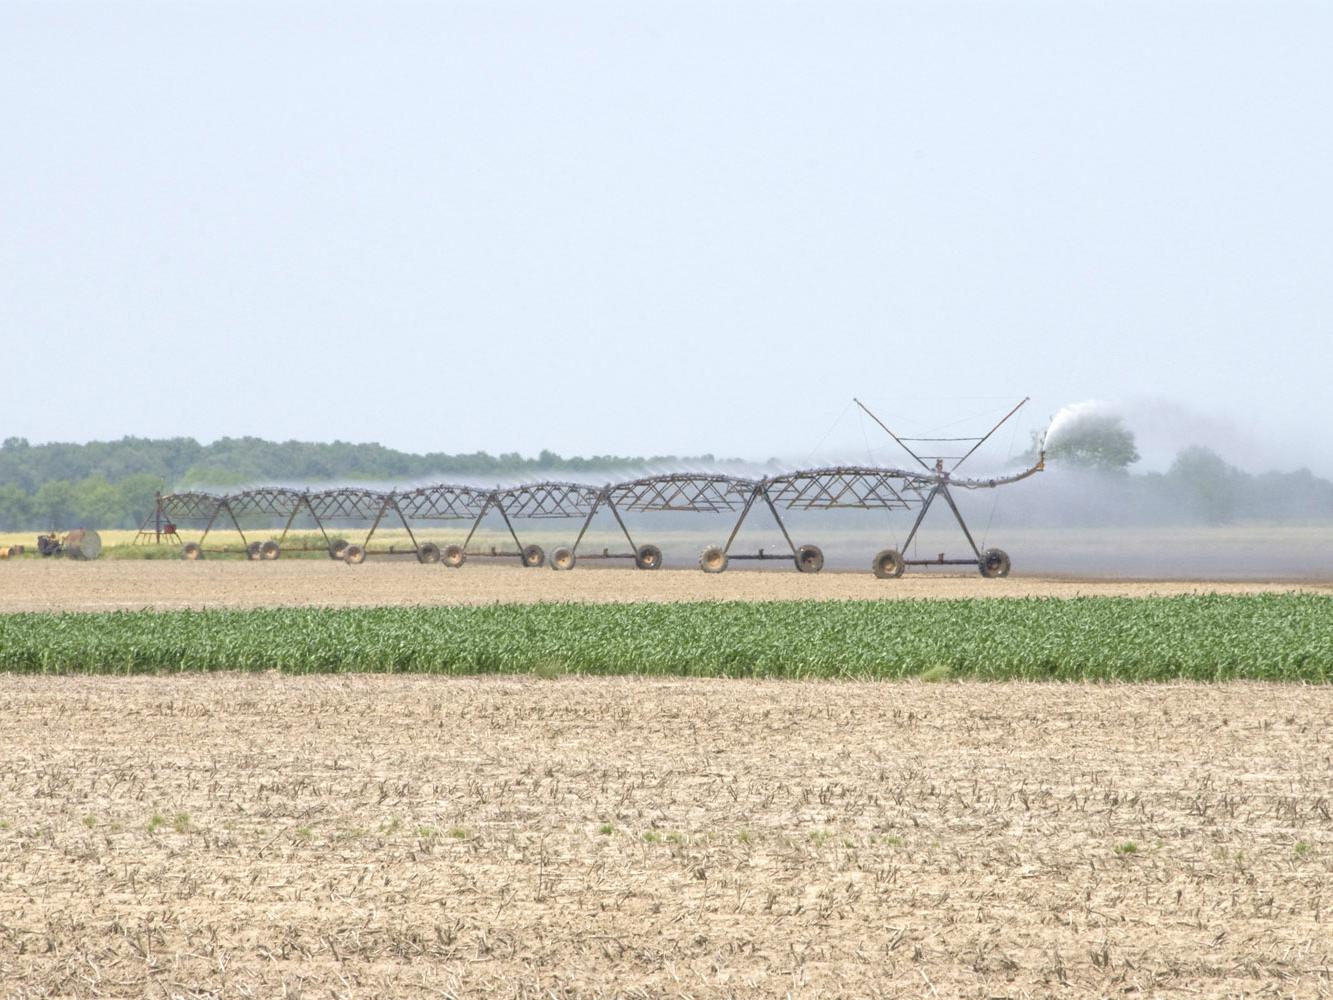 Recent high temperatures and a lack of rain have been harder on crops without irrigation than those with it. Many Mississippi farms are watered through pivot irrigation systems. (Photo by MSU Ag Communications/Marco Nicovich)